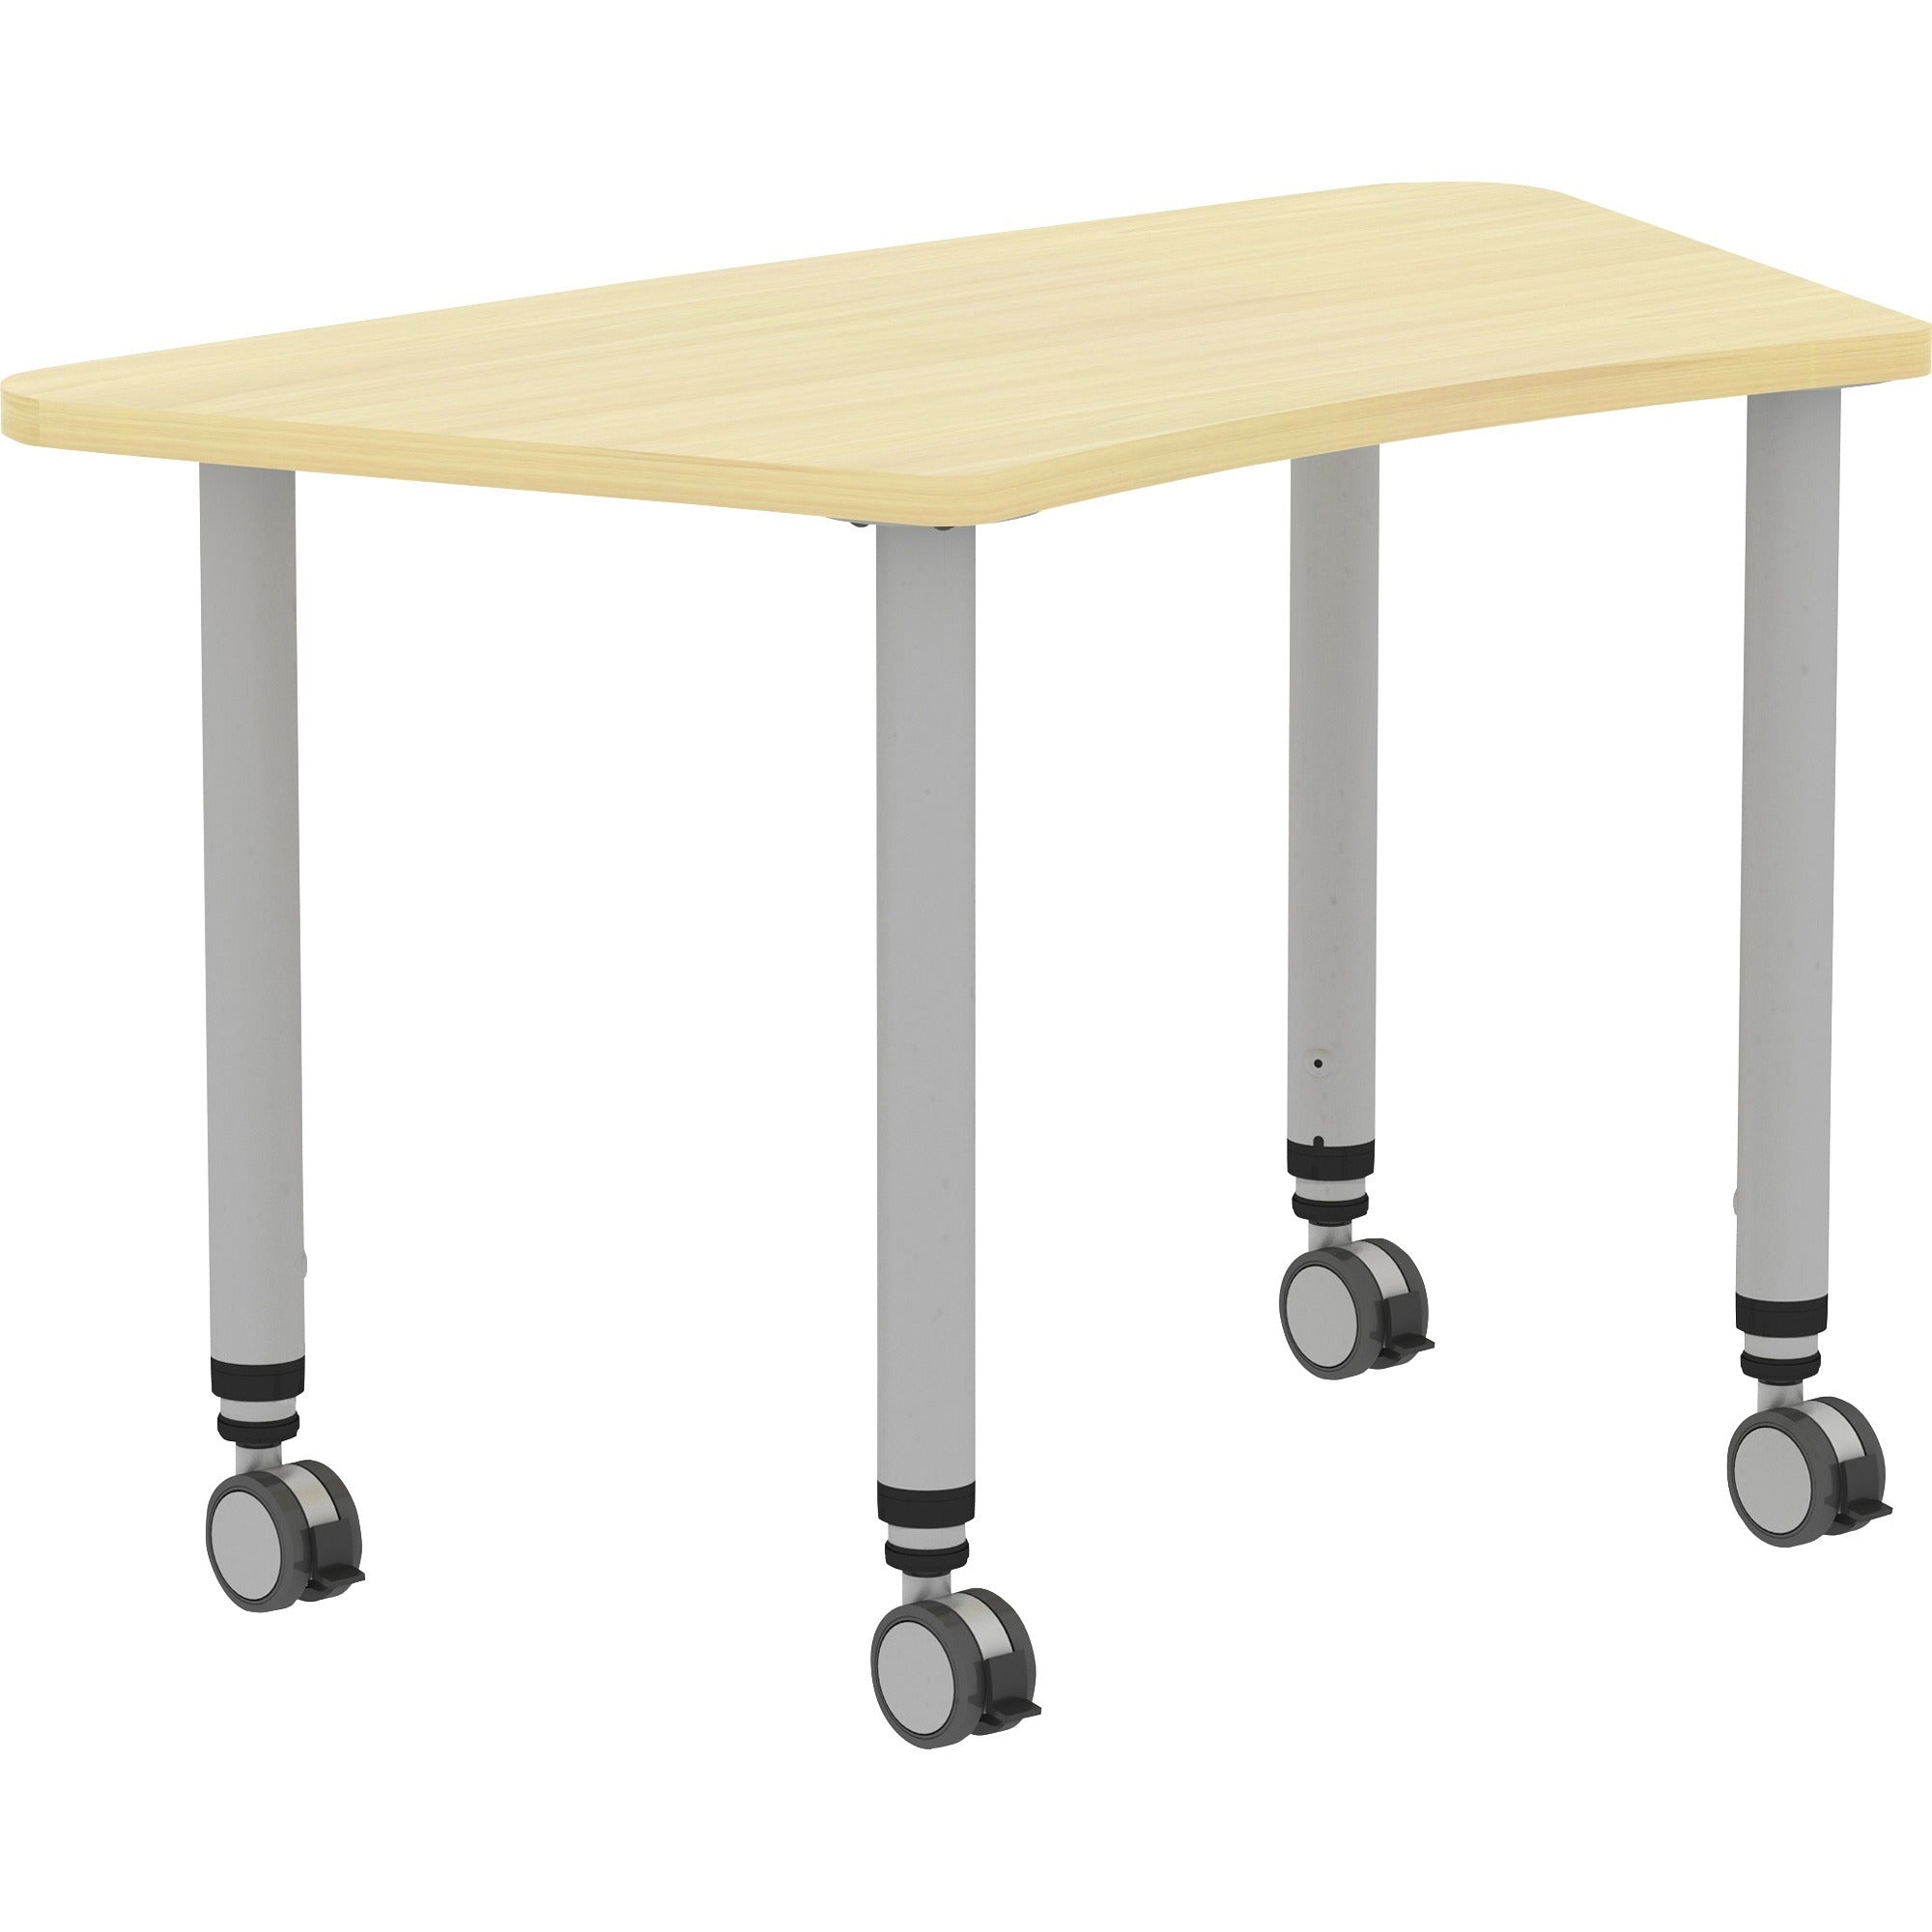 lorell-attune-height-adjustable-multipurpose-curved-table-for-table-toptrapezoid-top-adjustable-height-2662-to-3362-adjustment-x-60-table-top-width-x-2362-table-top-depth-3362-height-assembly-required-laminated-maple-laminat_llr69584 - 2